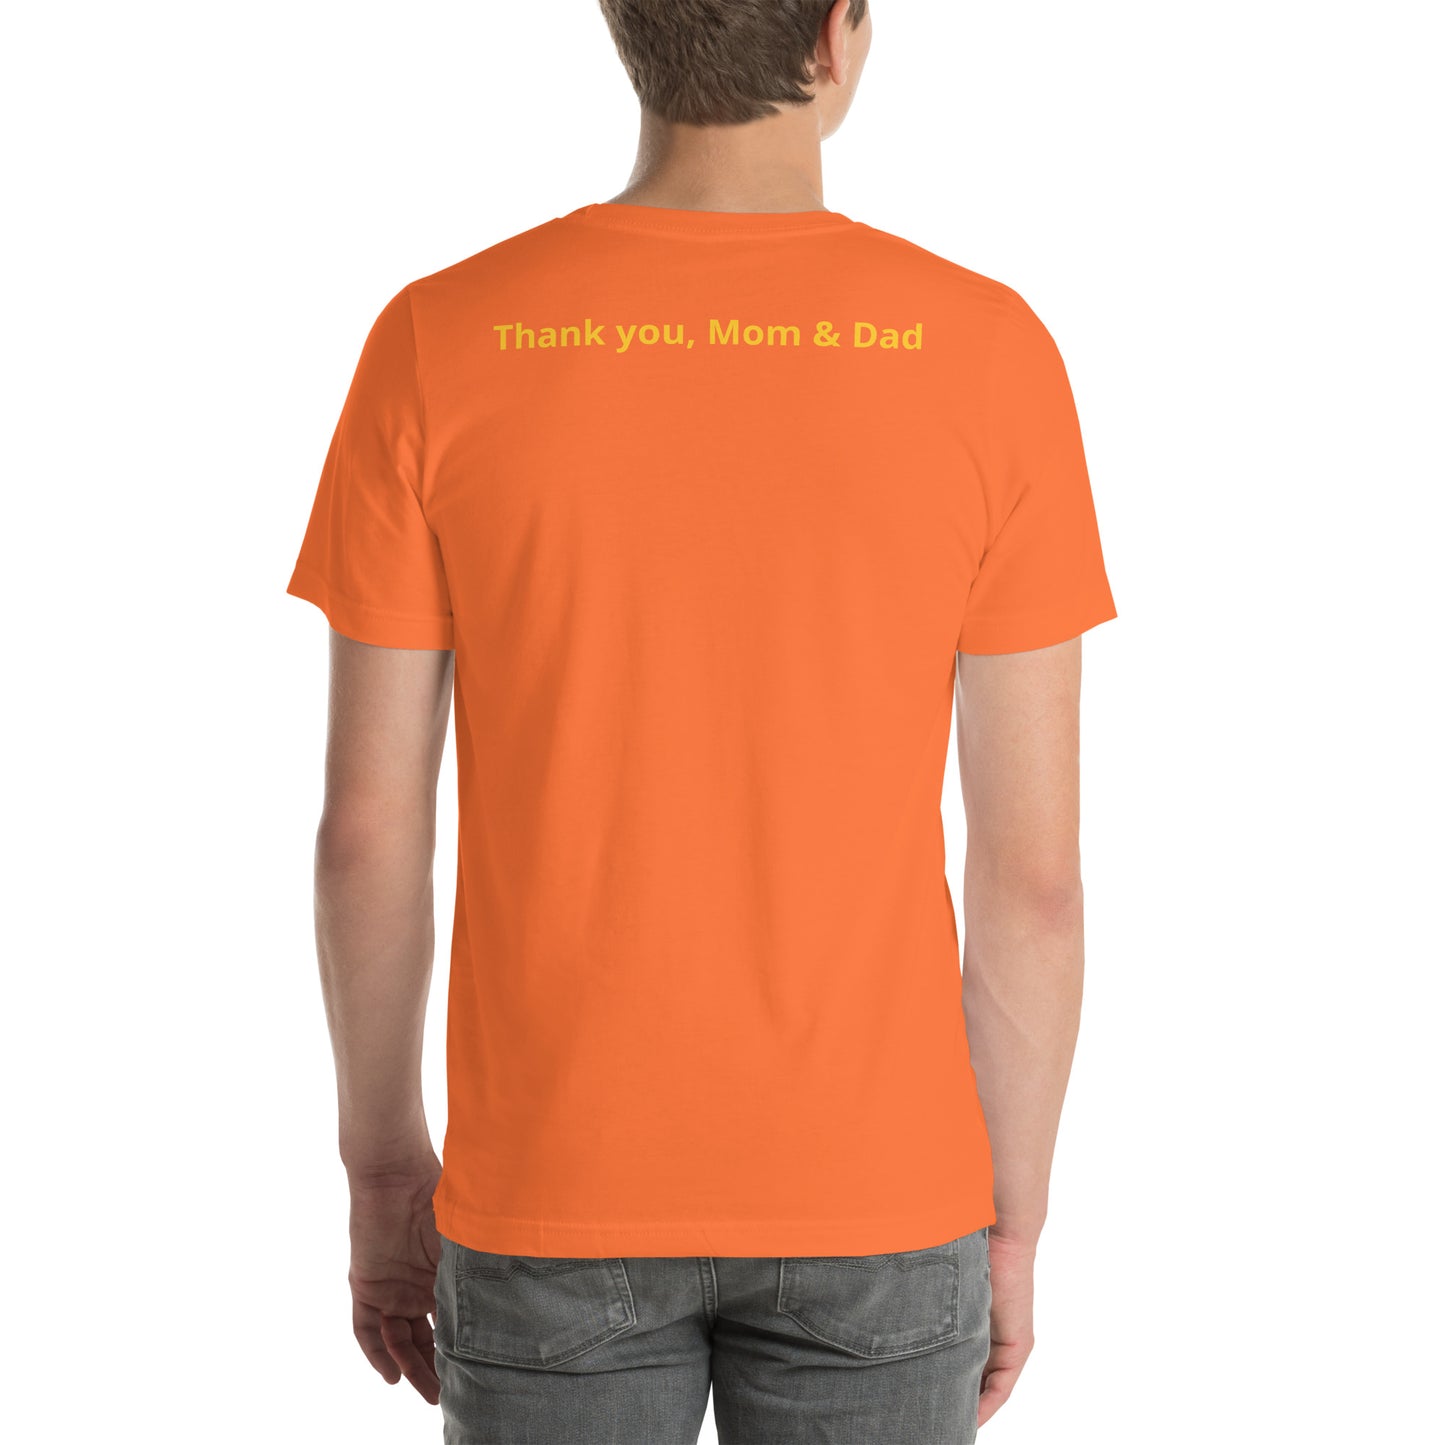 Orange color short sleeve tee shirt that says "College '24 Grad" on the front and "Thank you, Mom & Dad" on the back in yellow-gold font